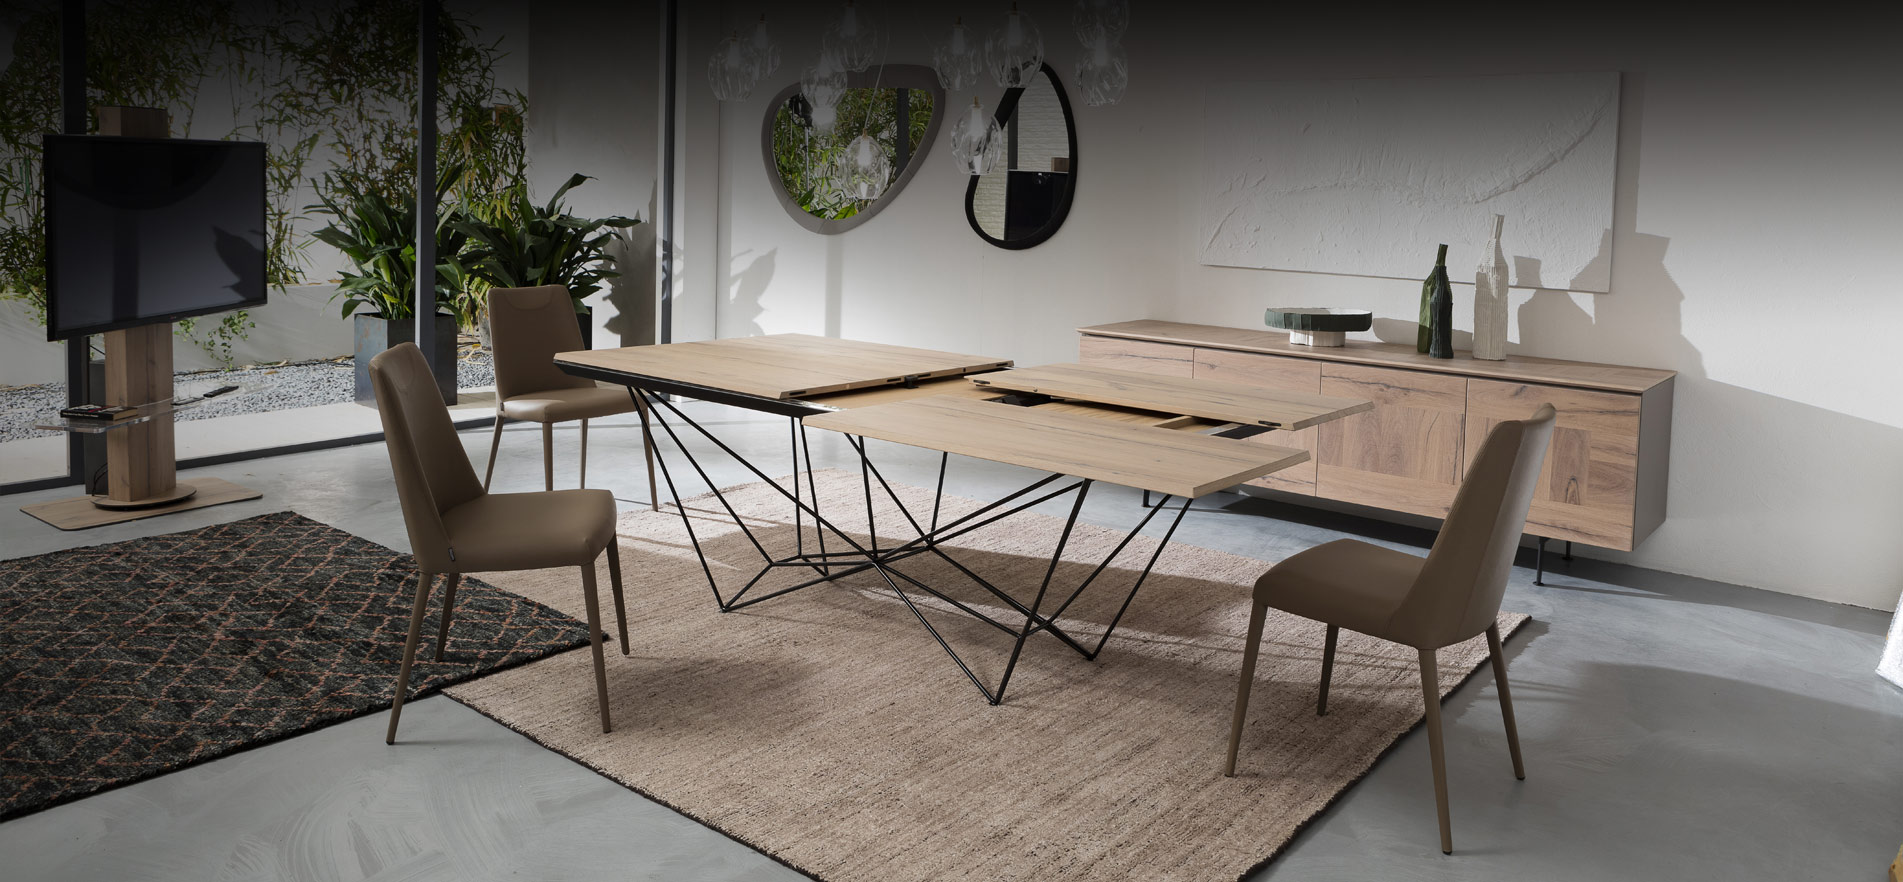 Design dining table round